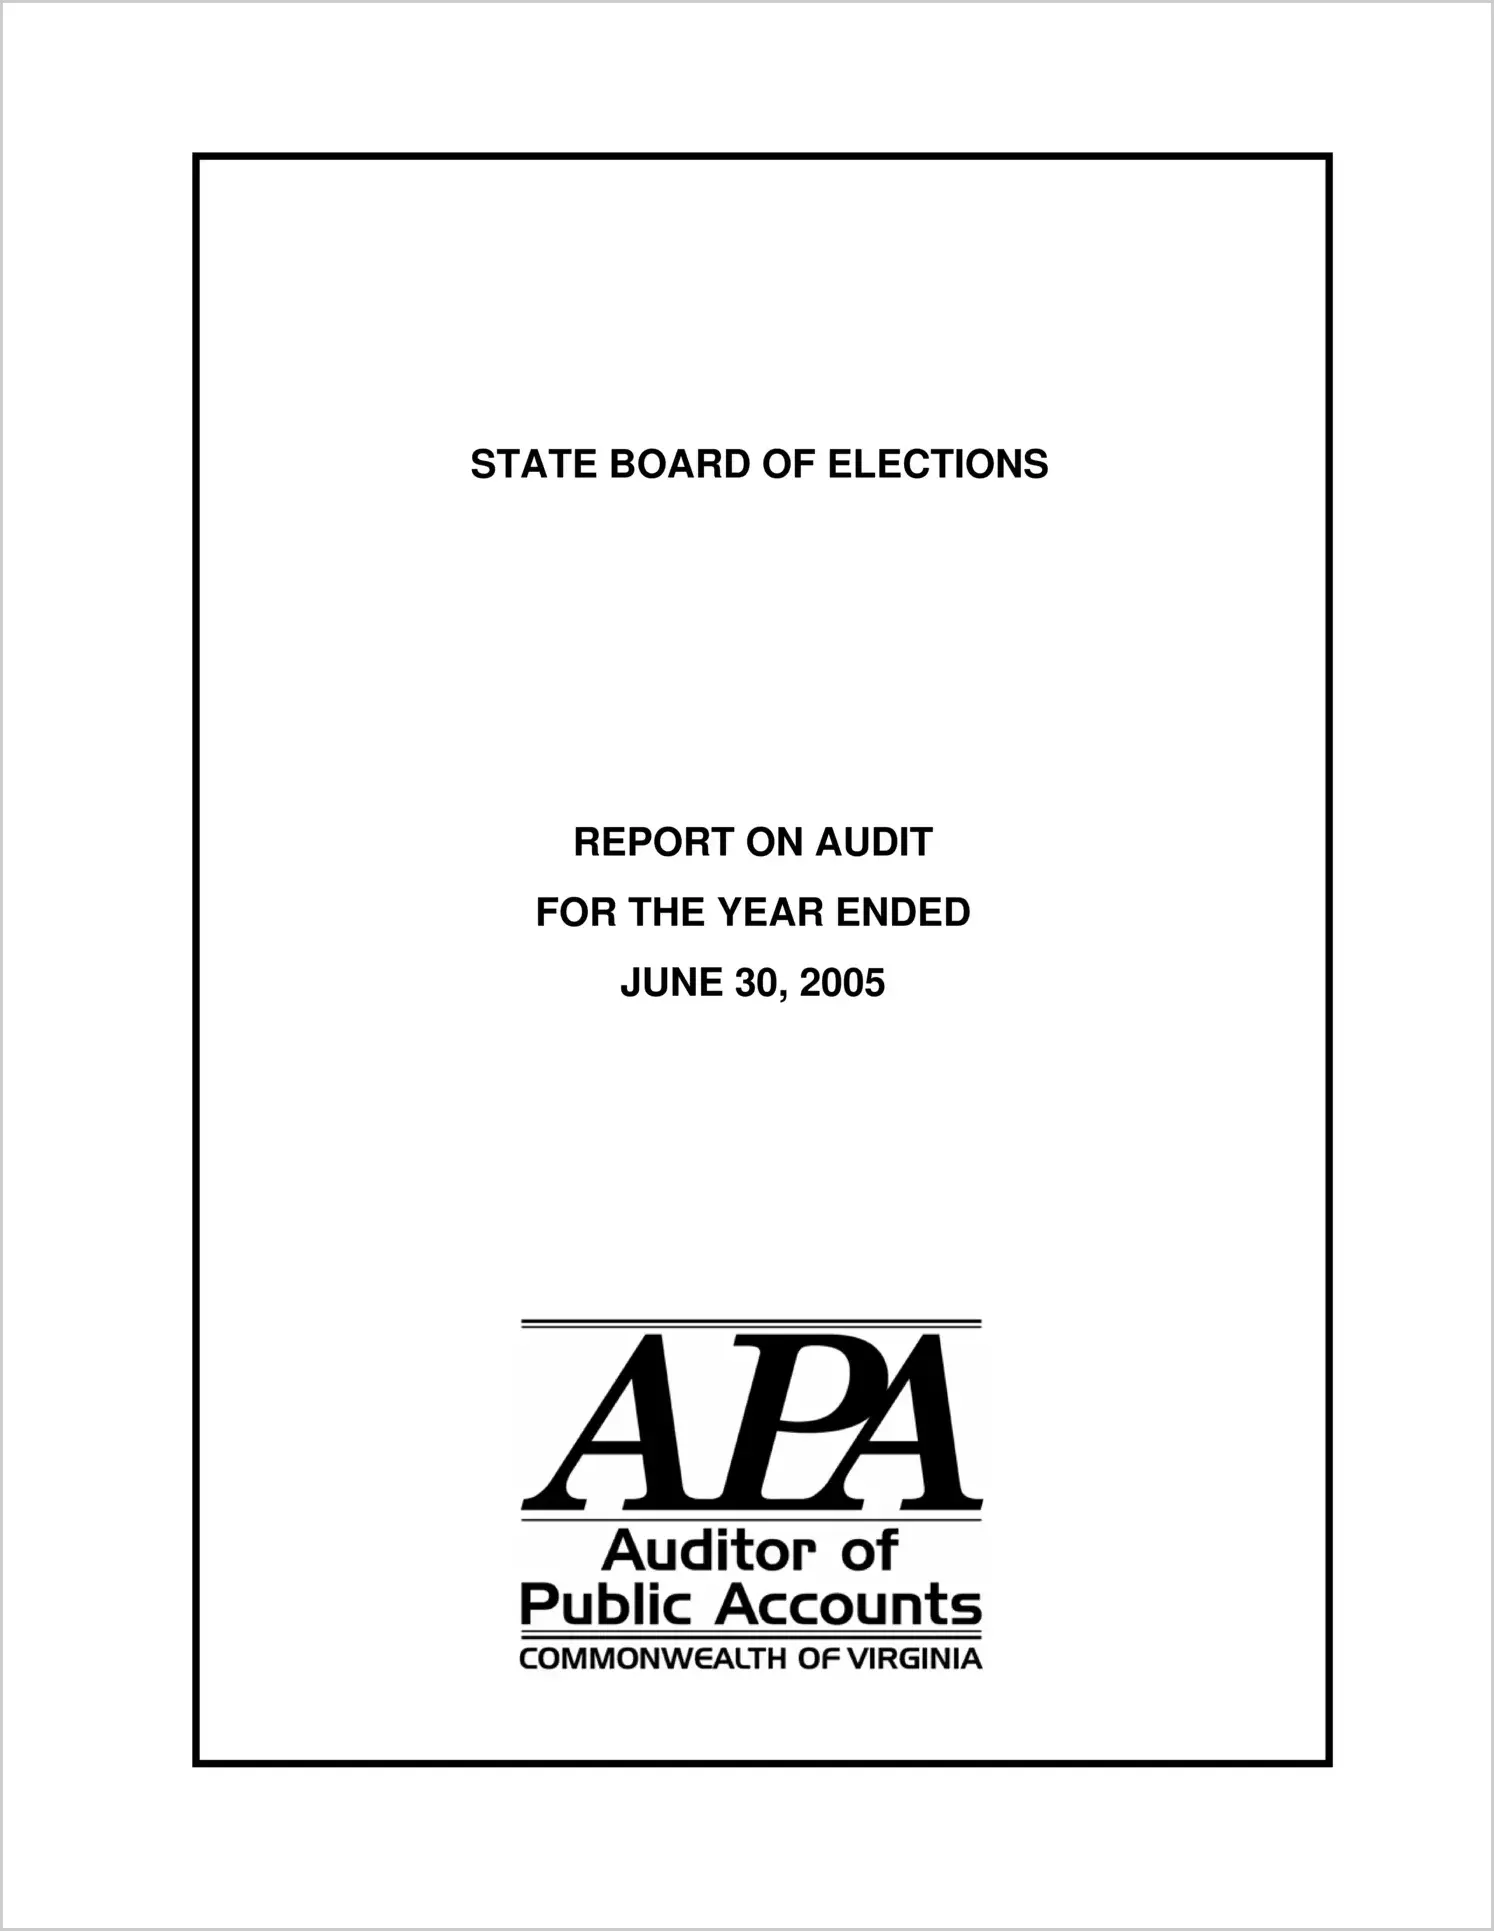 State Board of Elections For the two-year period ended June 30, 2005